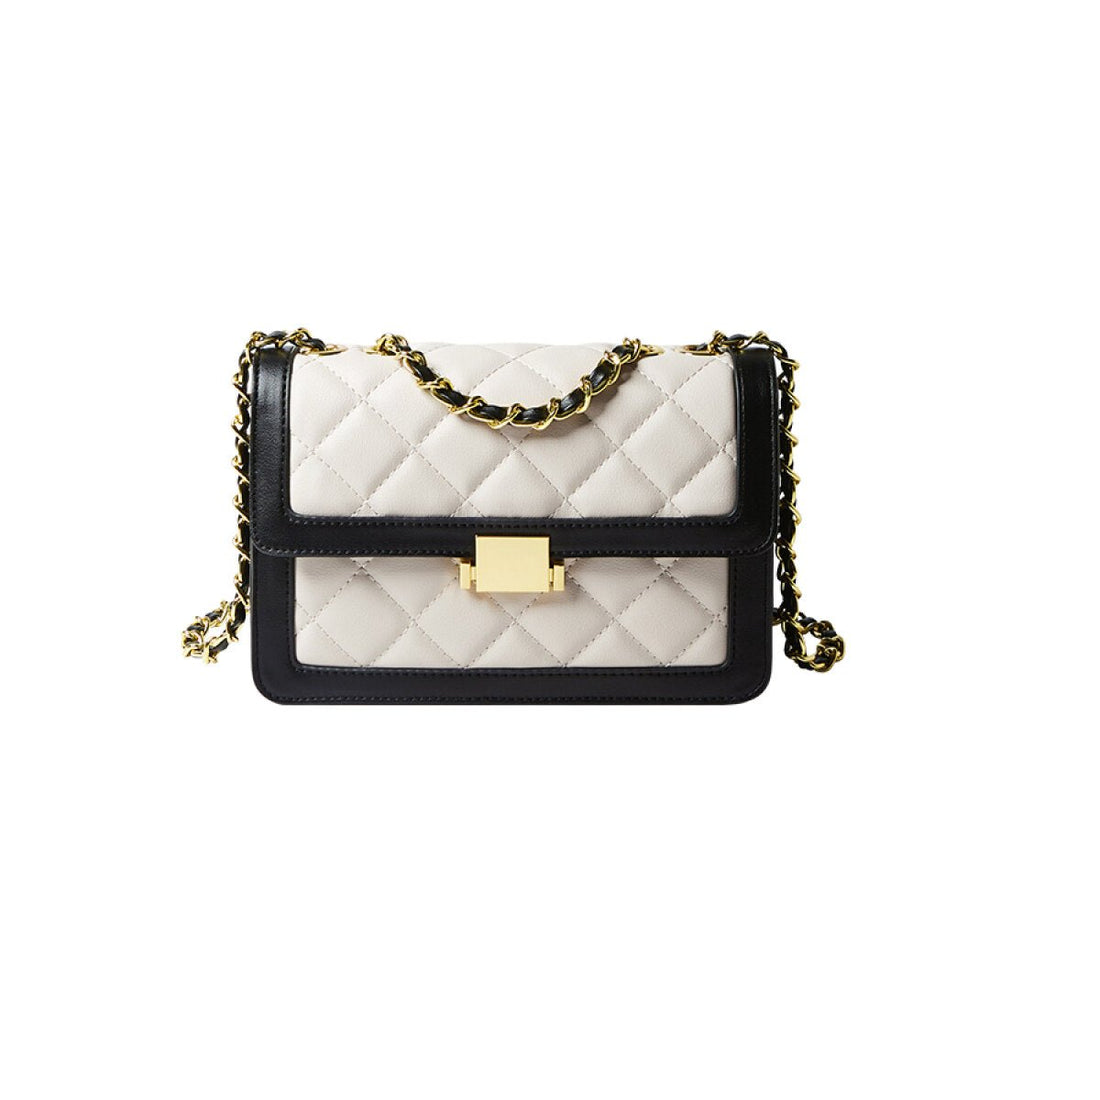 Luxe Black Diamond-Quilted Chain Shoulder Bag - 0cm